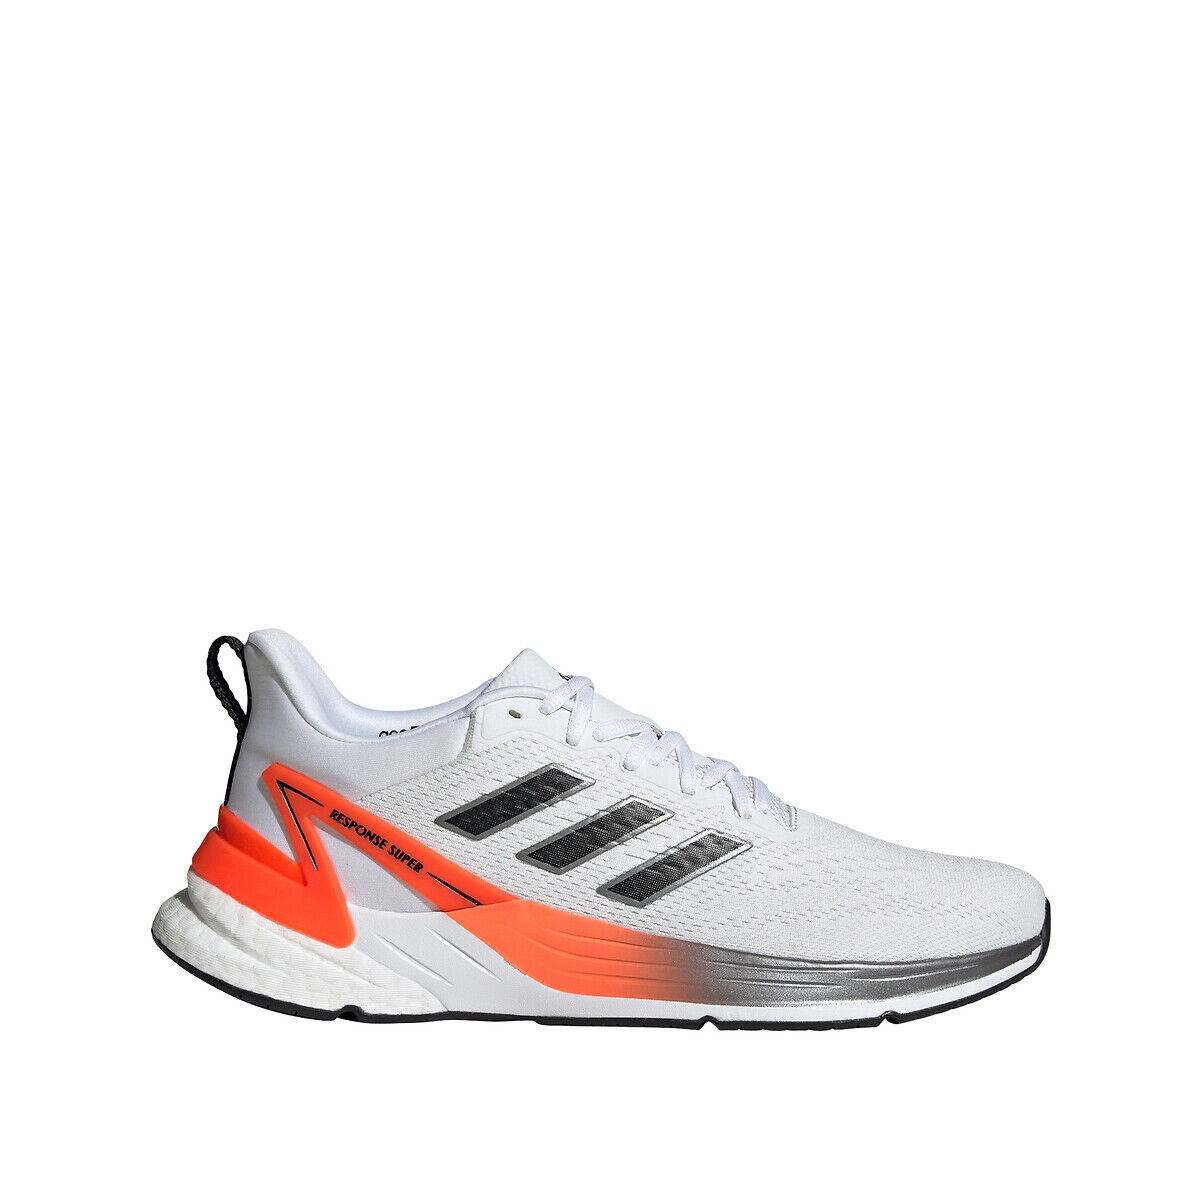 Adidas Sneakers Response WEISS